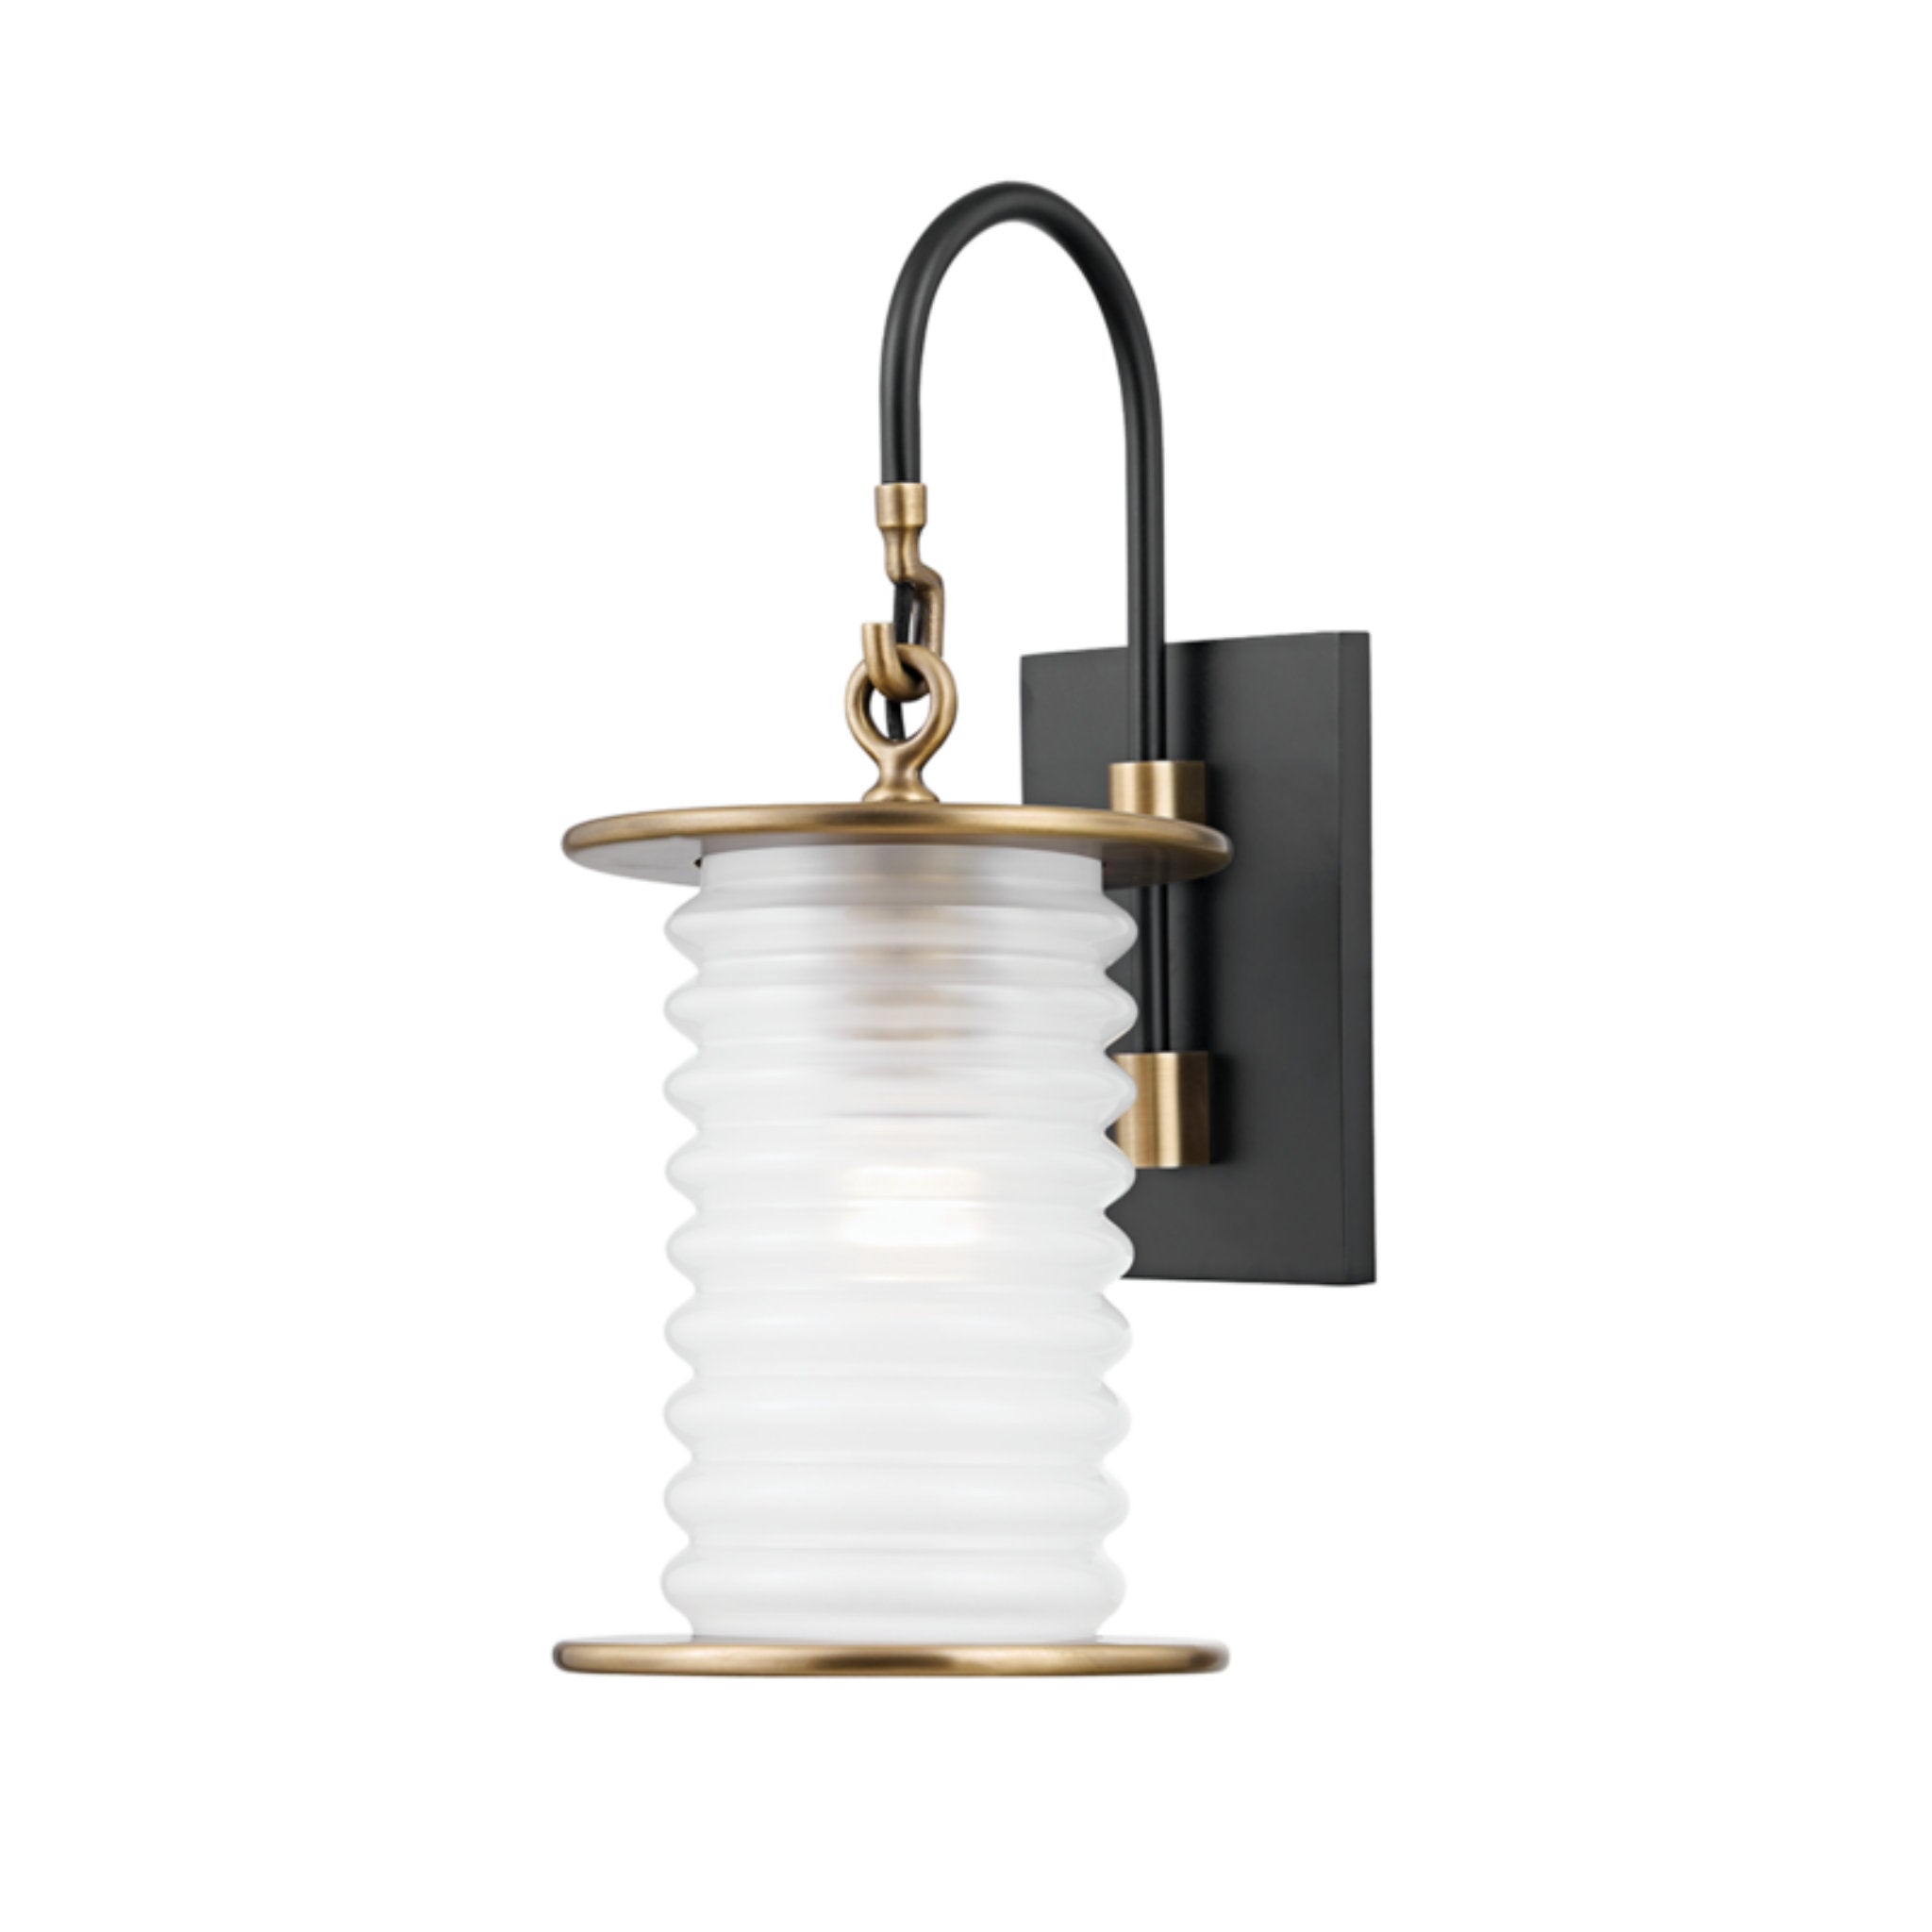 Danvers 1 Light Wall Sconce in Patina Brass/Texture Black